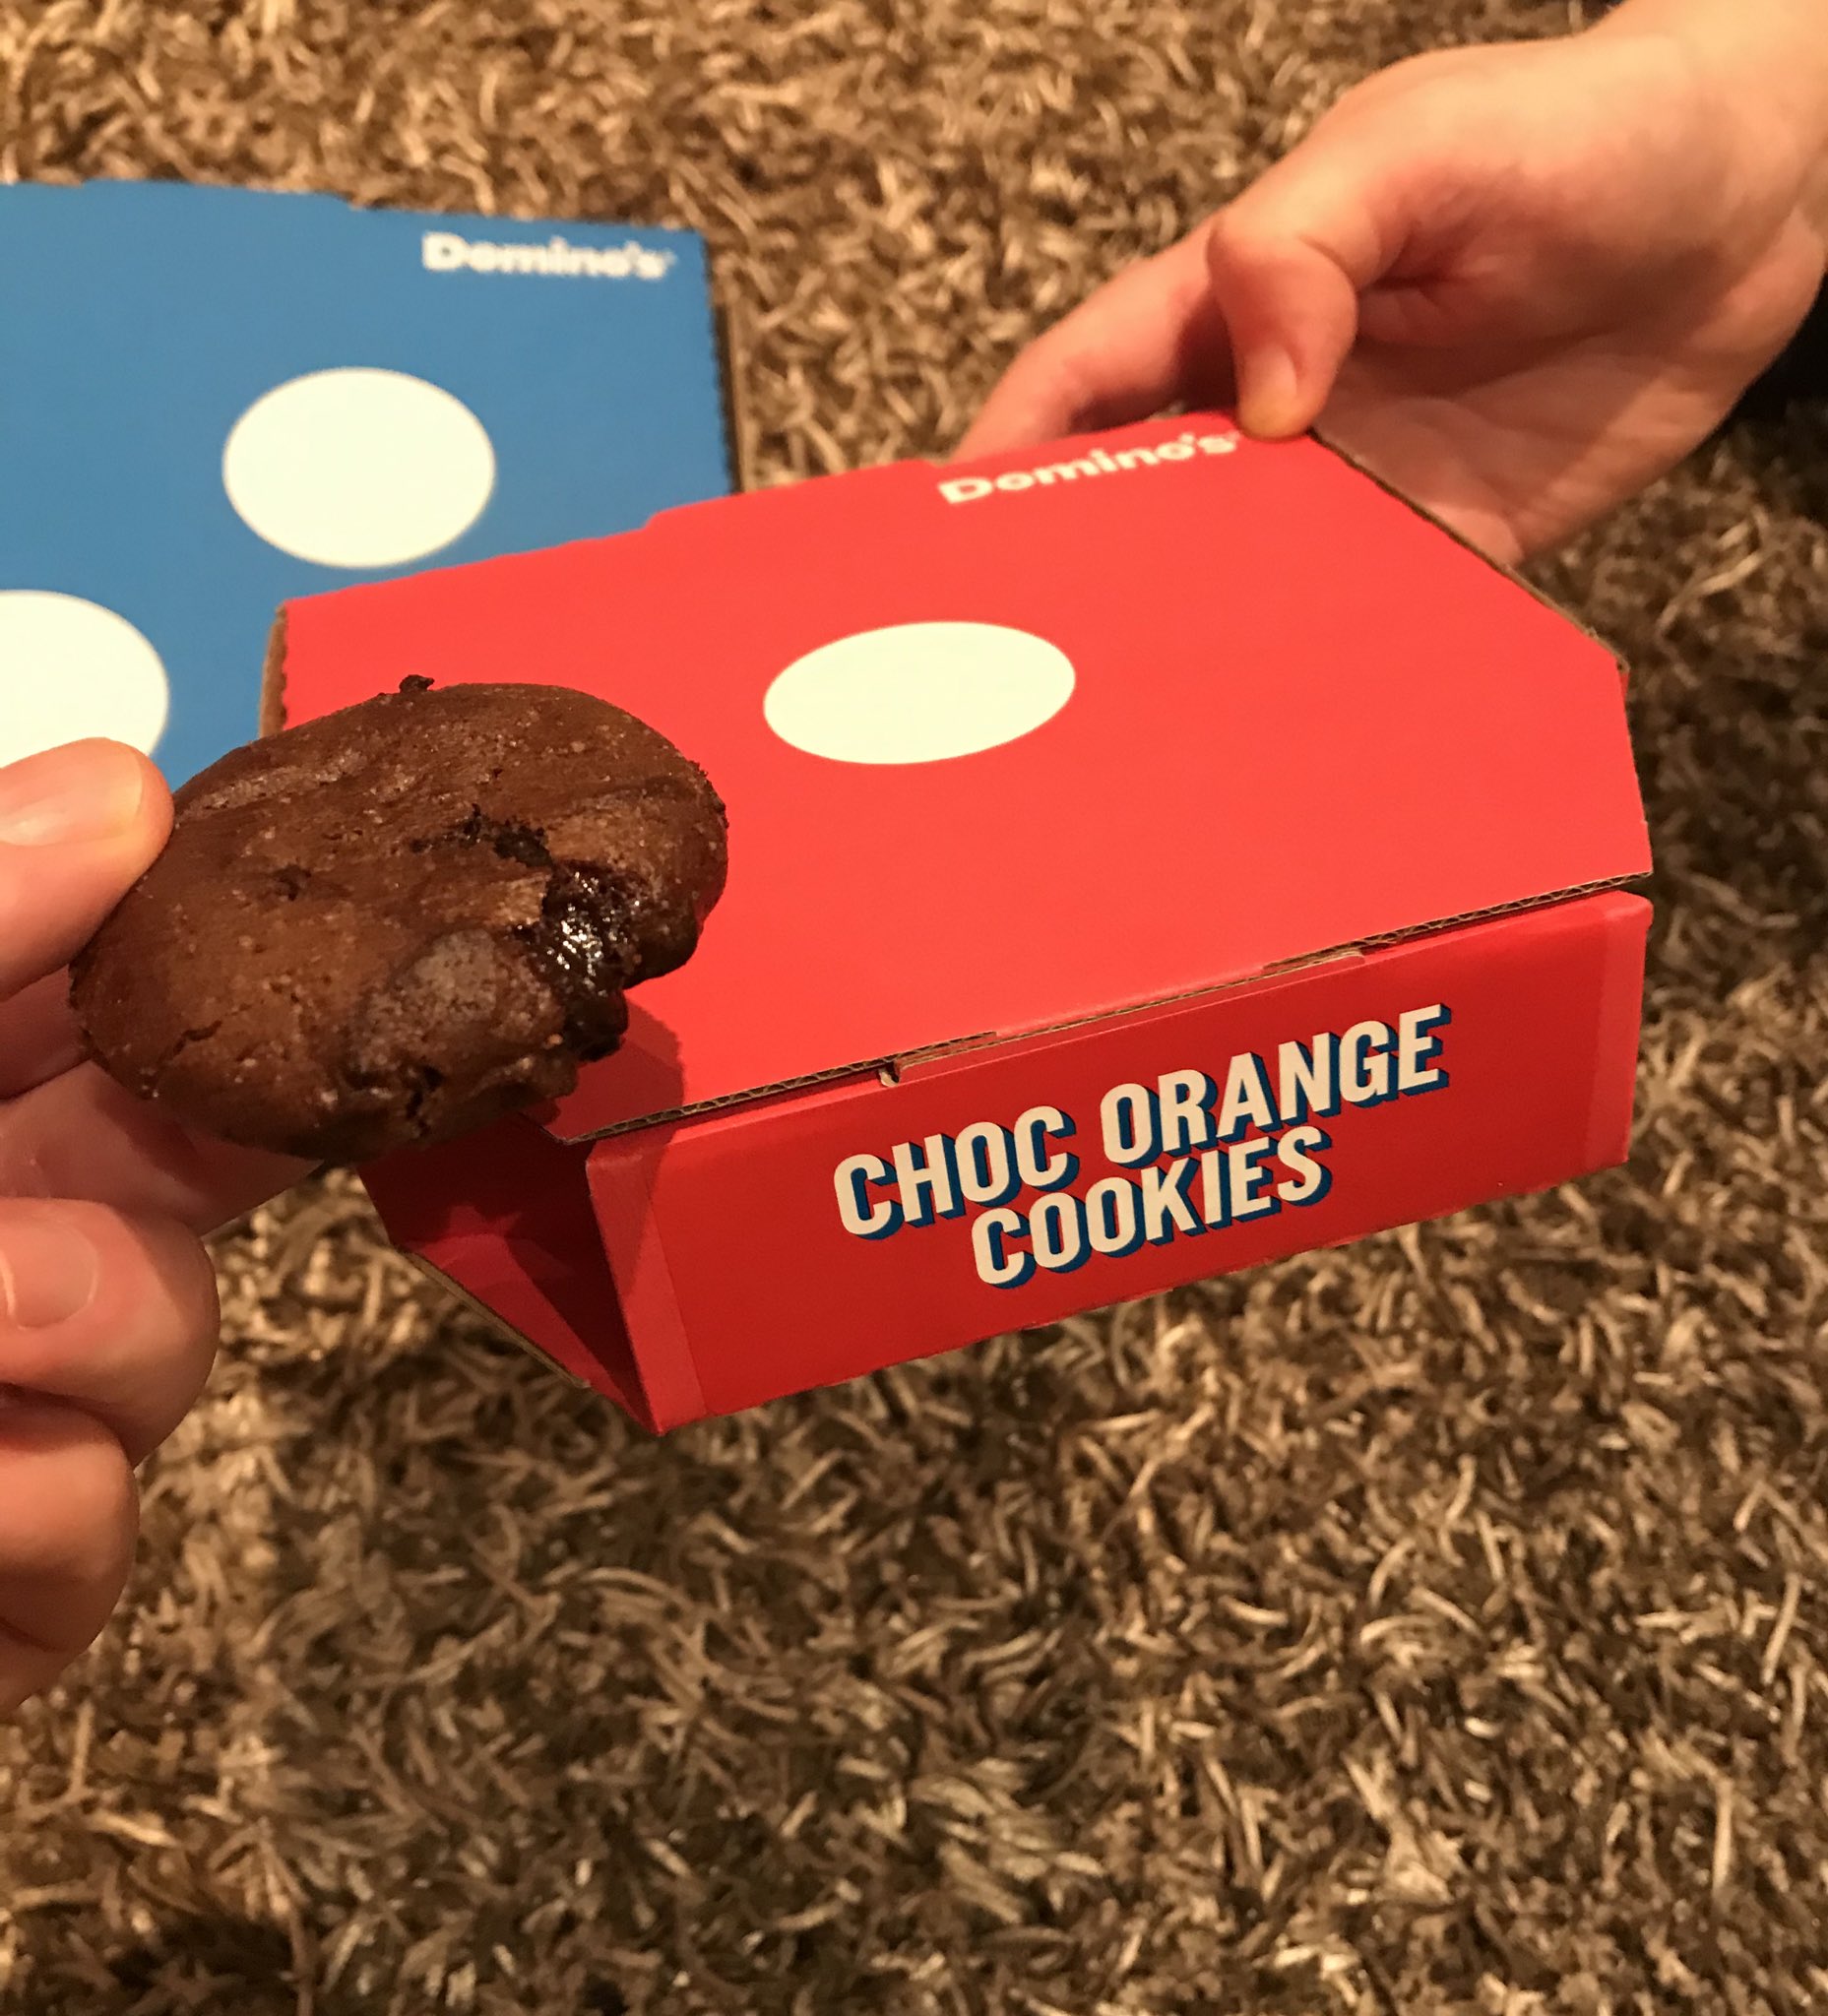 Well This Is New on X: "[Gifted] Choc Orange Cookies! 🍫🍊 Domino's has  joined the chocolate orange craze and created these ultra tasty cookies.  They've got a gooey chocolate orange middle and